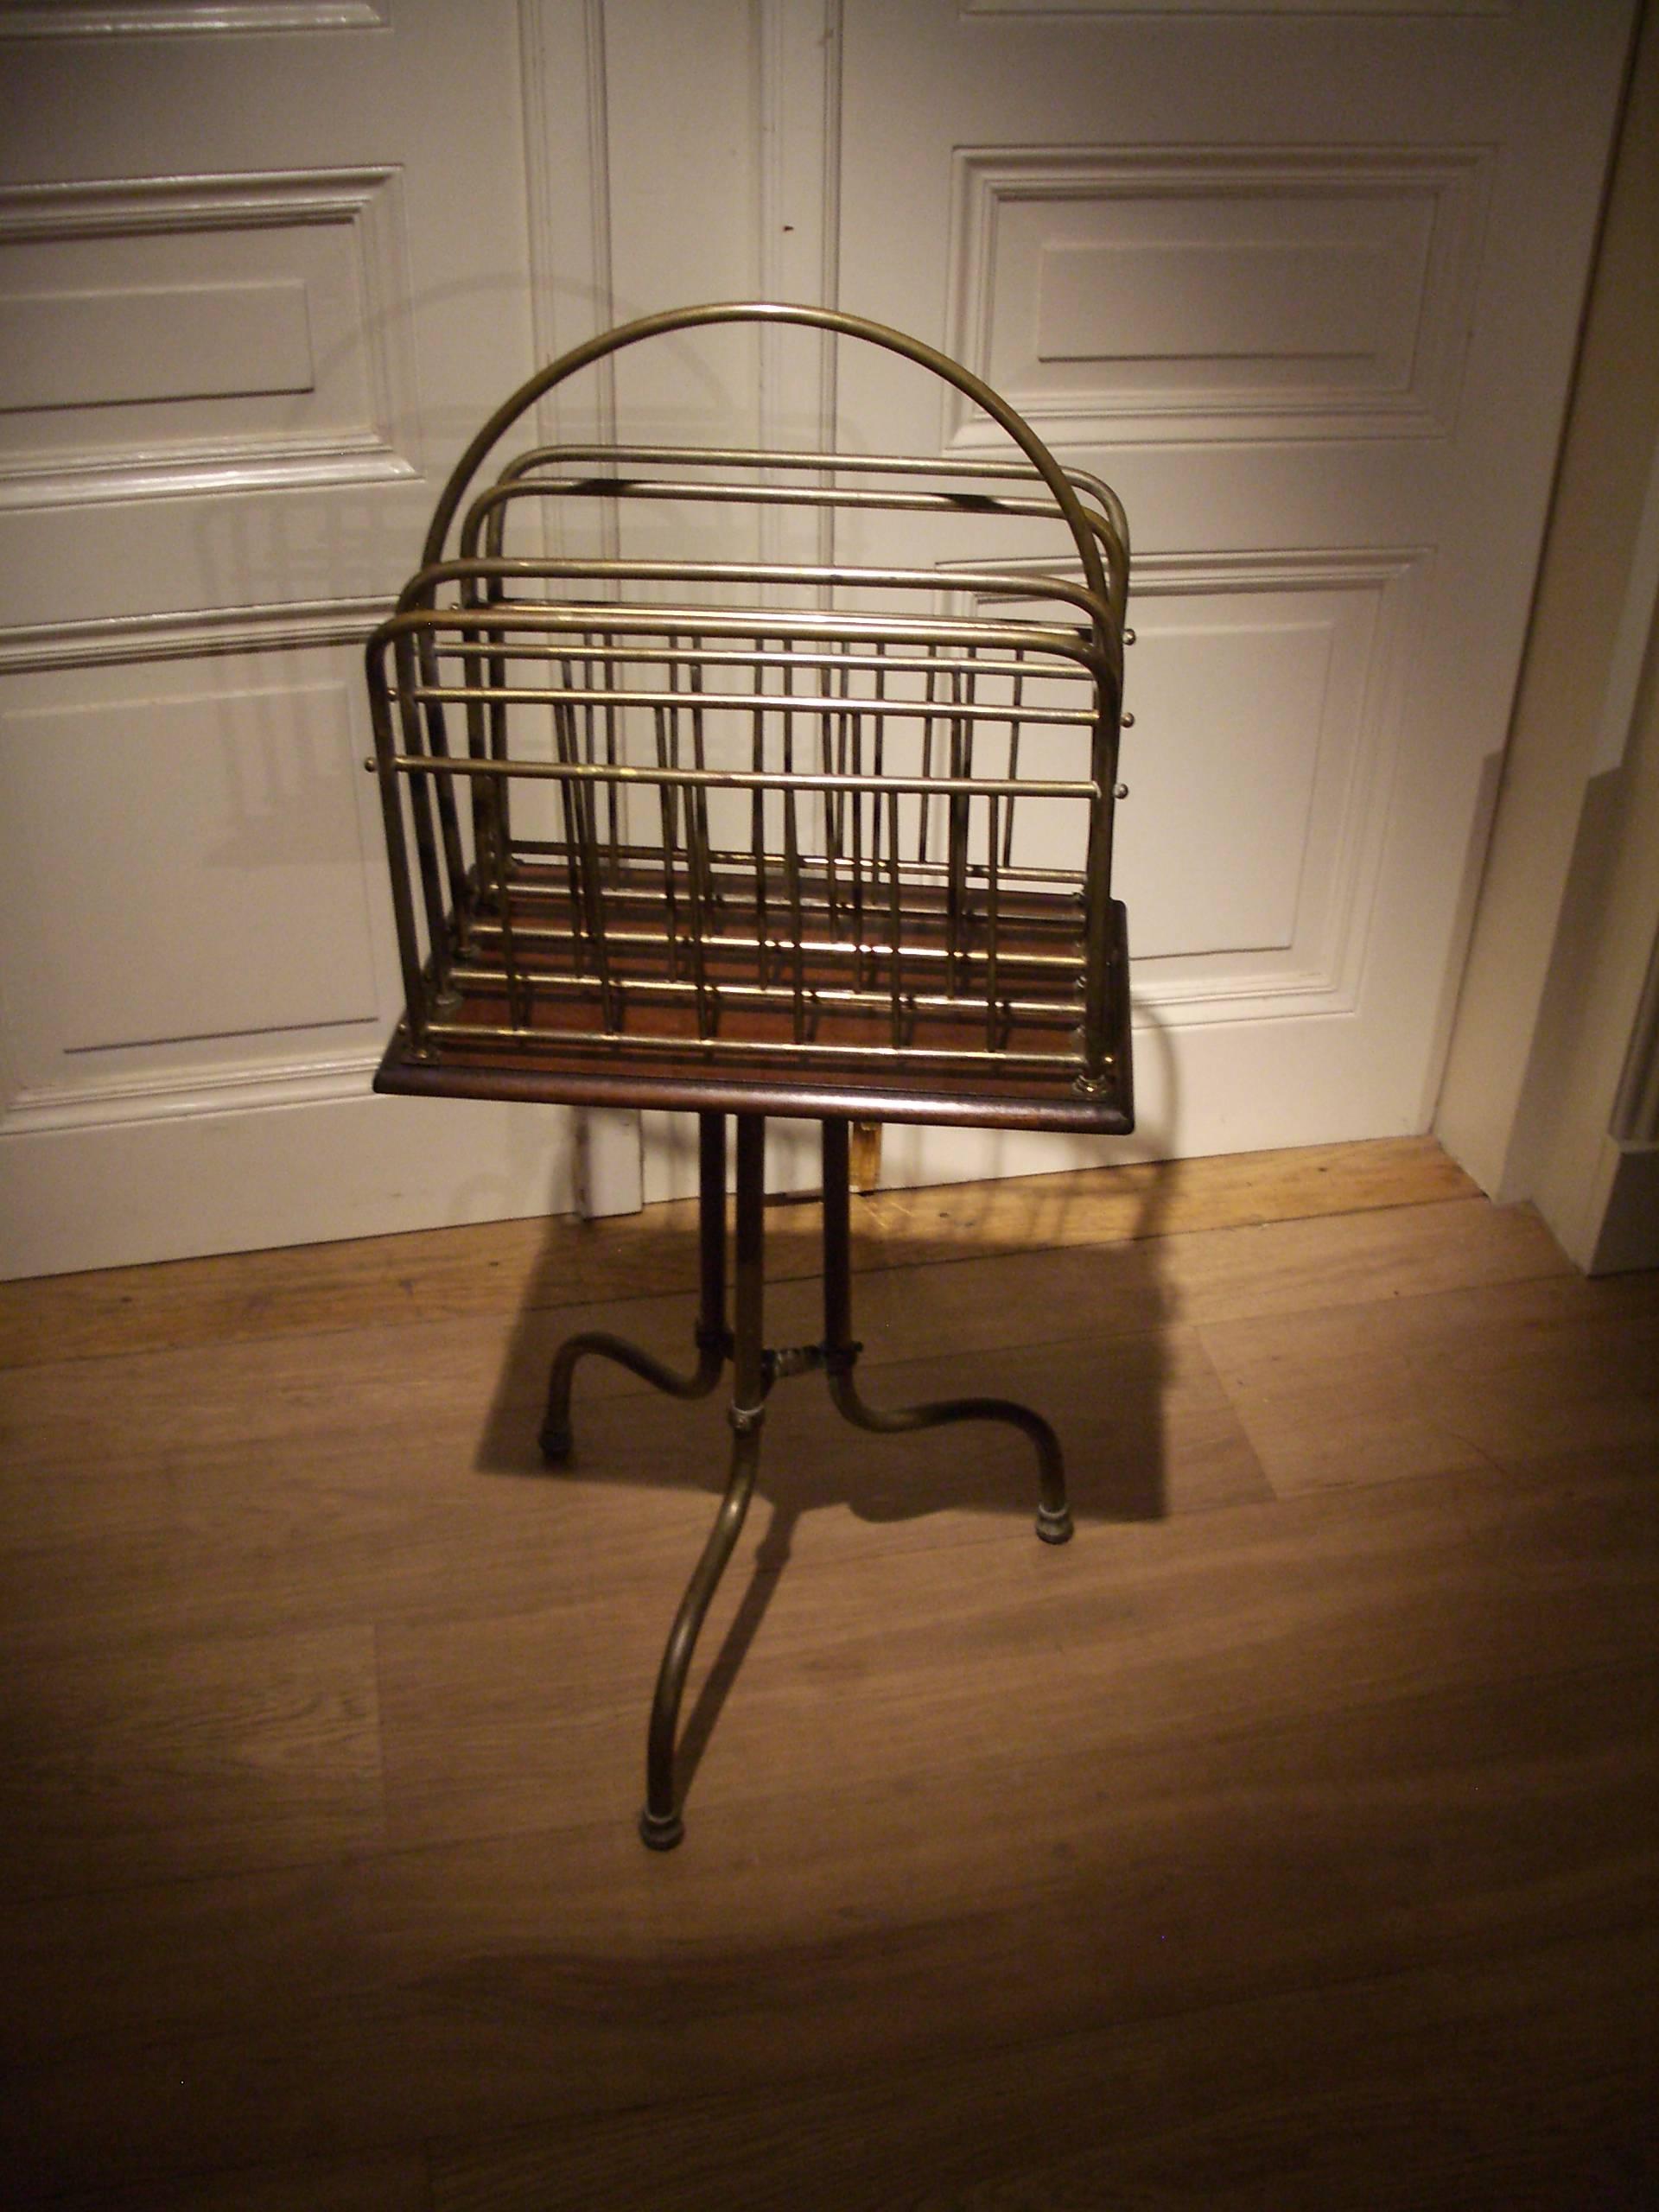 This very practical antique magazine rack dates from the Edwardian period, circa 1900.